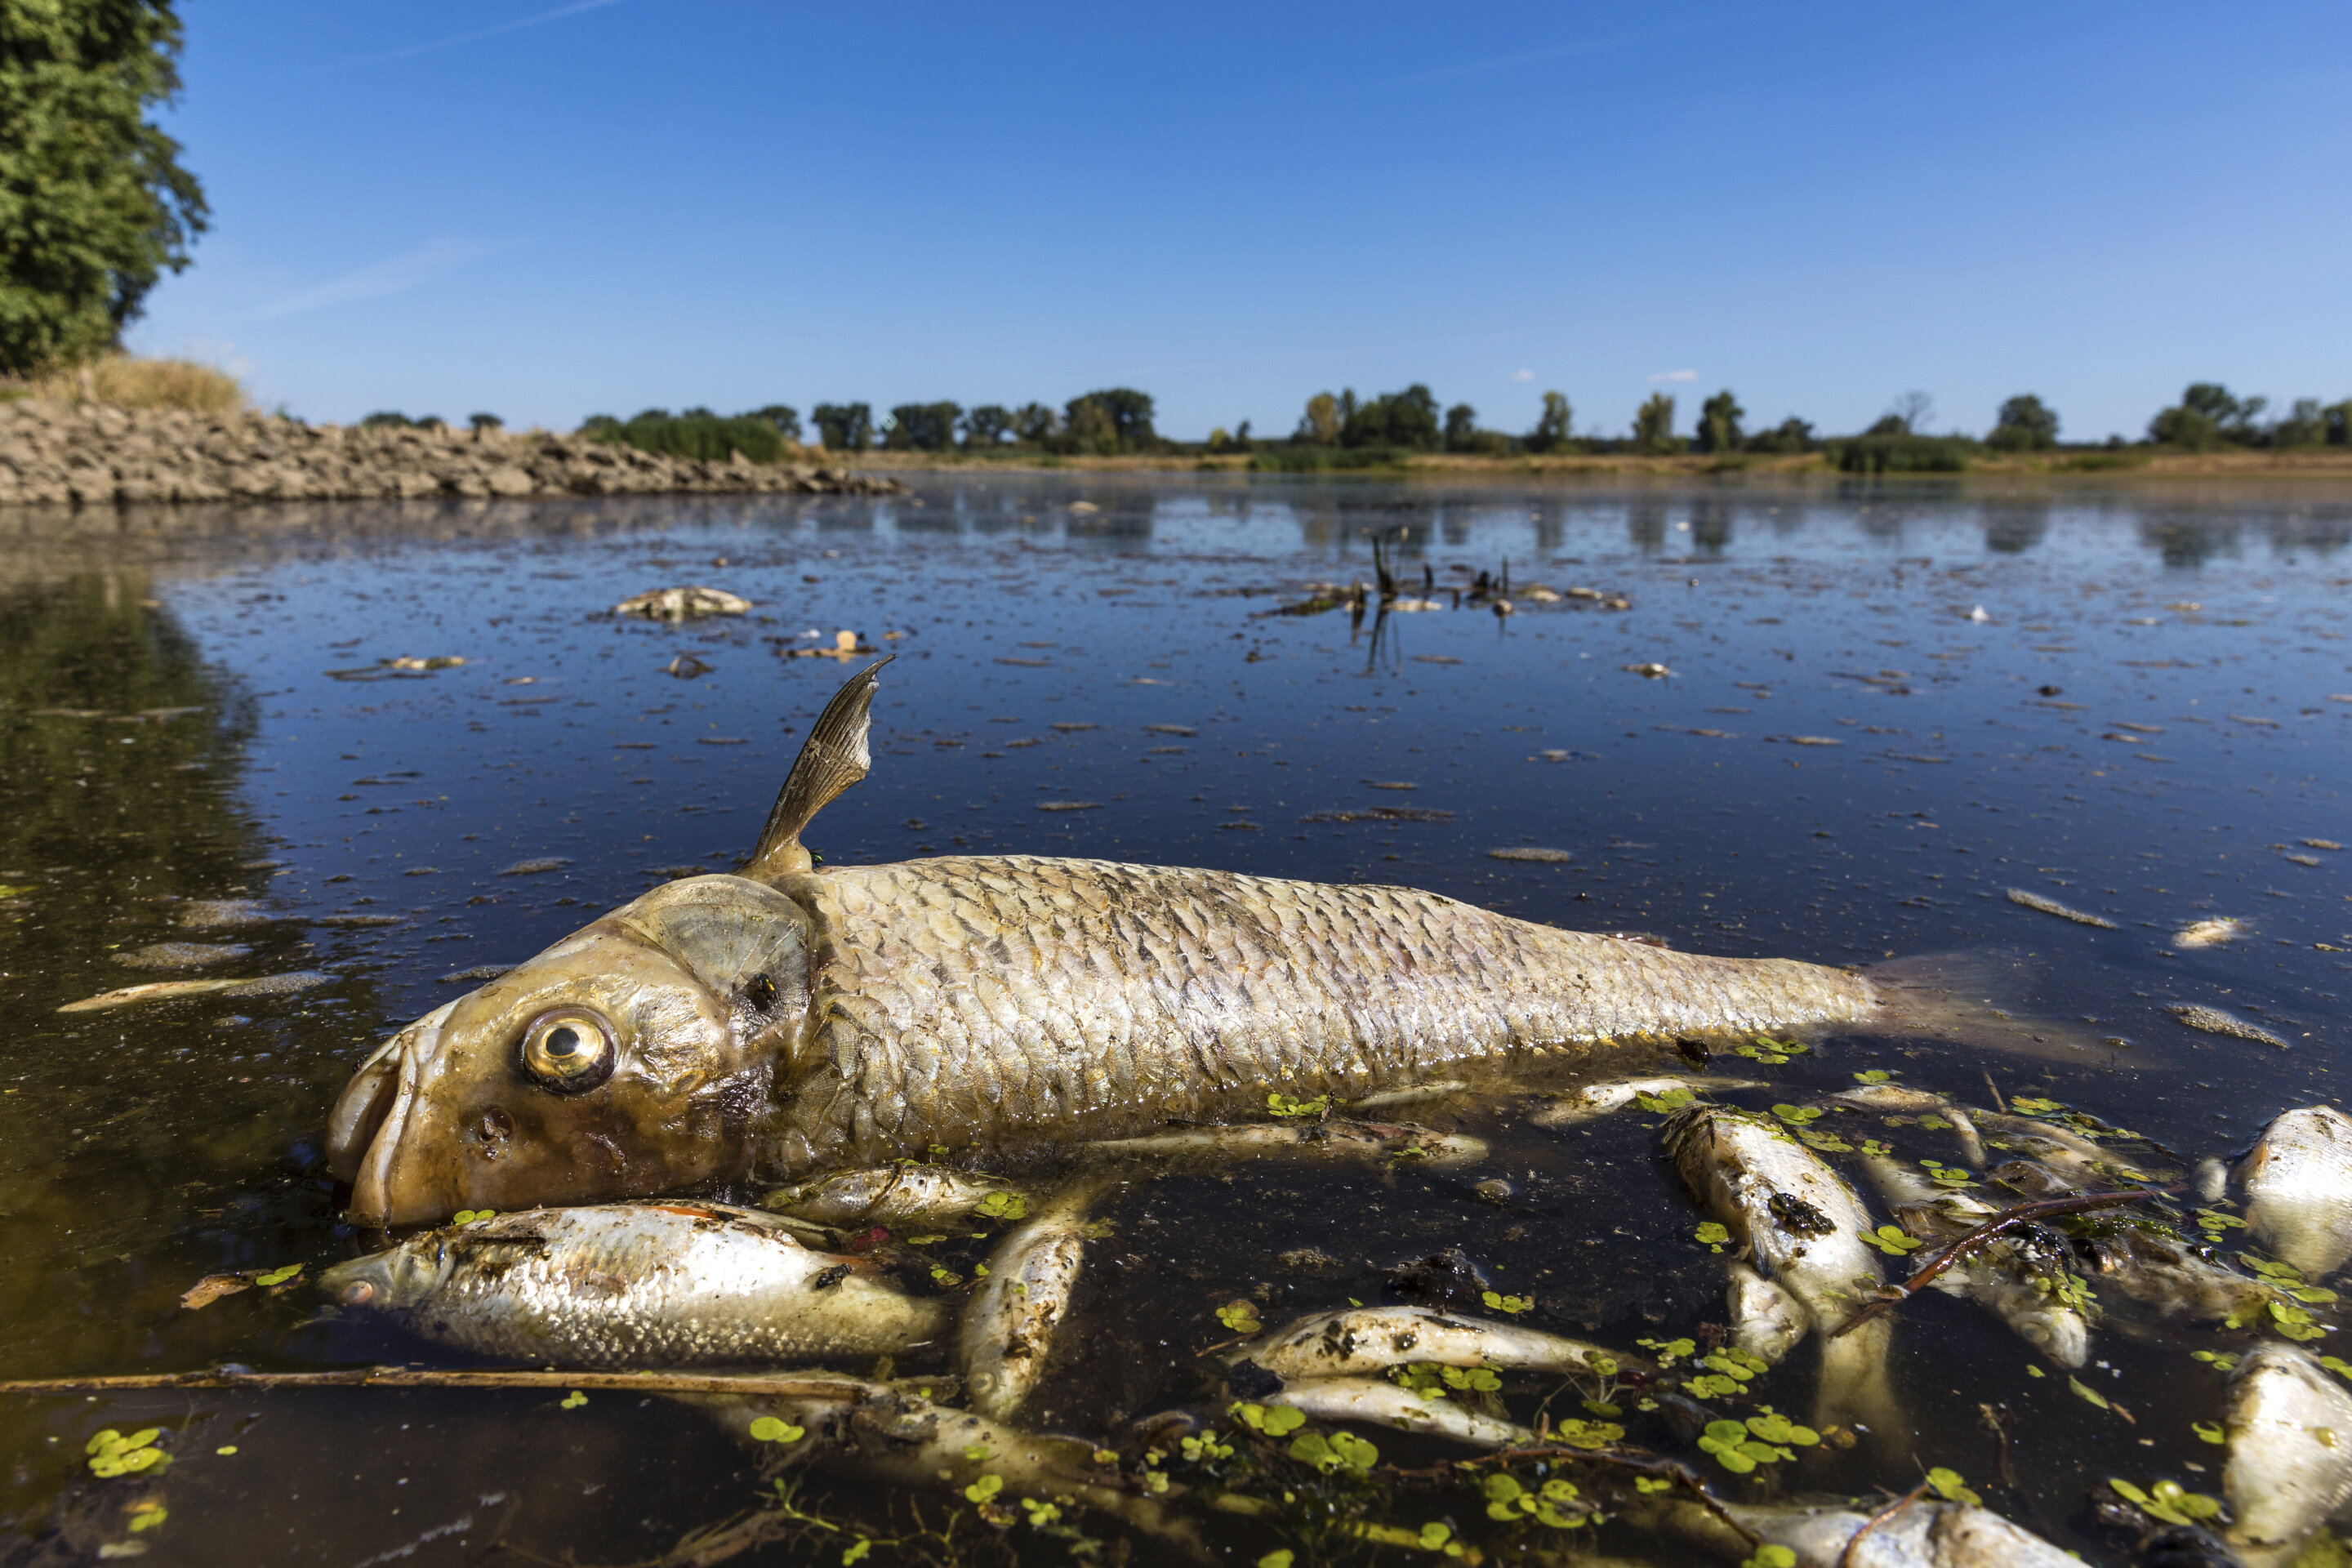 wildfires-spread-fish-die-off-amid-severe-drought-in-europe